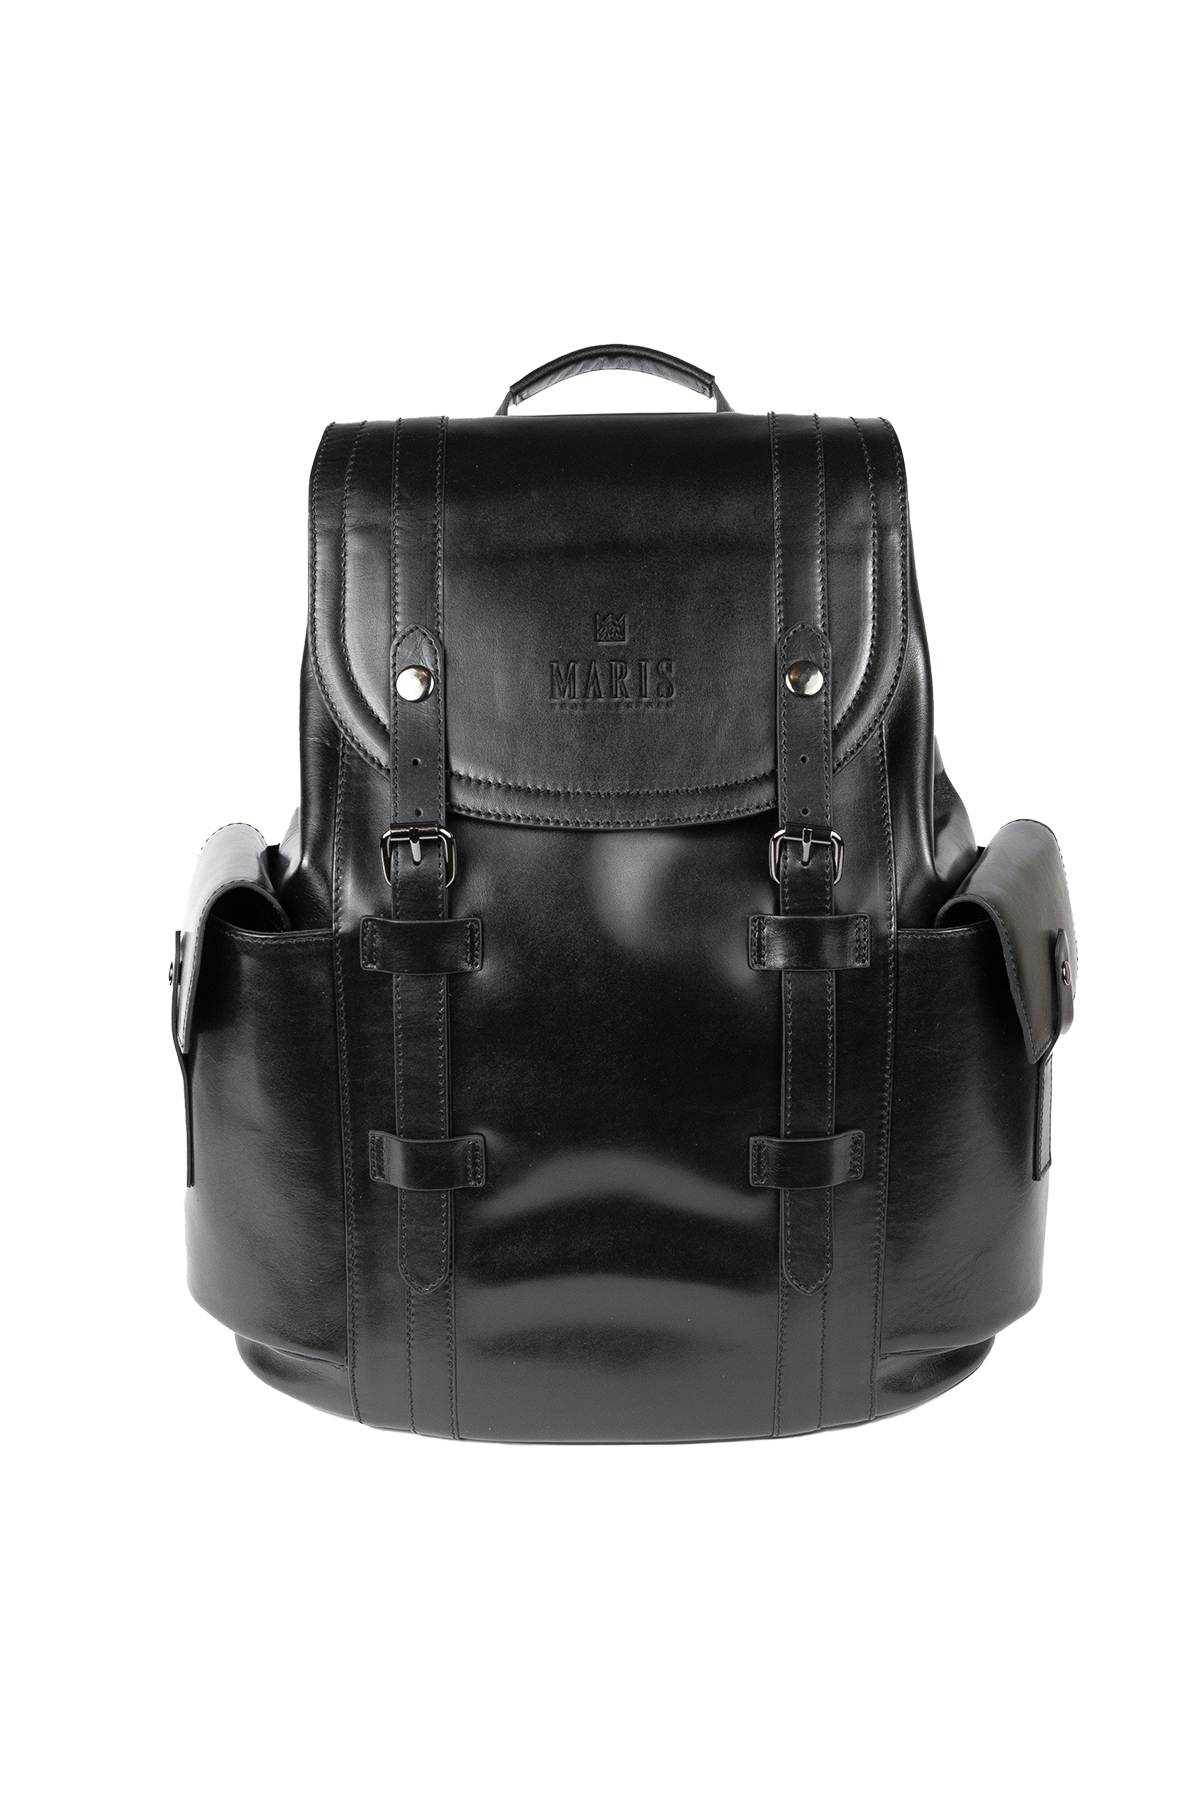 Black Leather Backpack with Side pockets